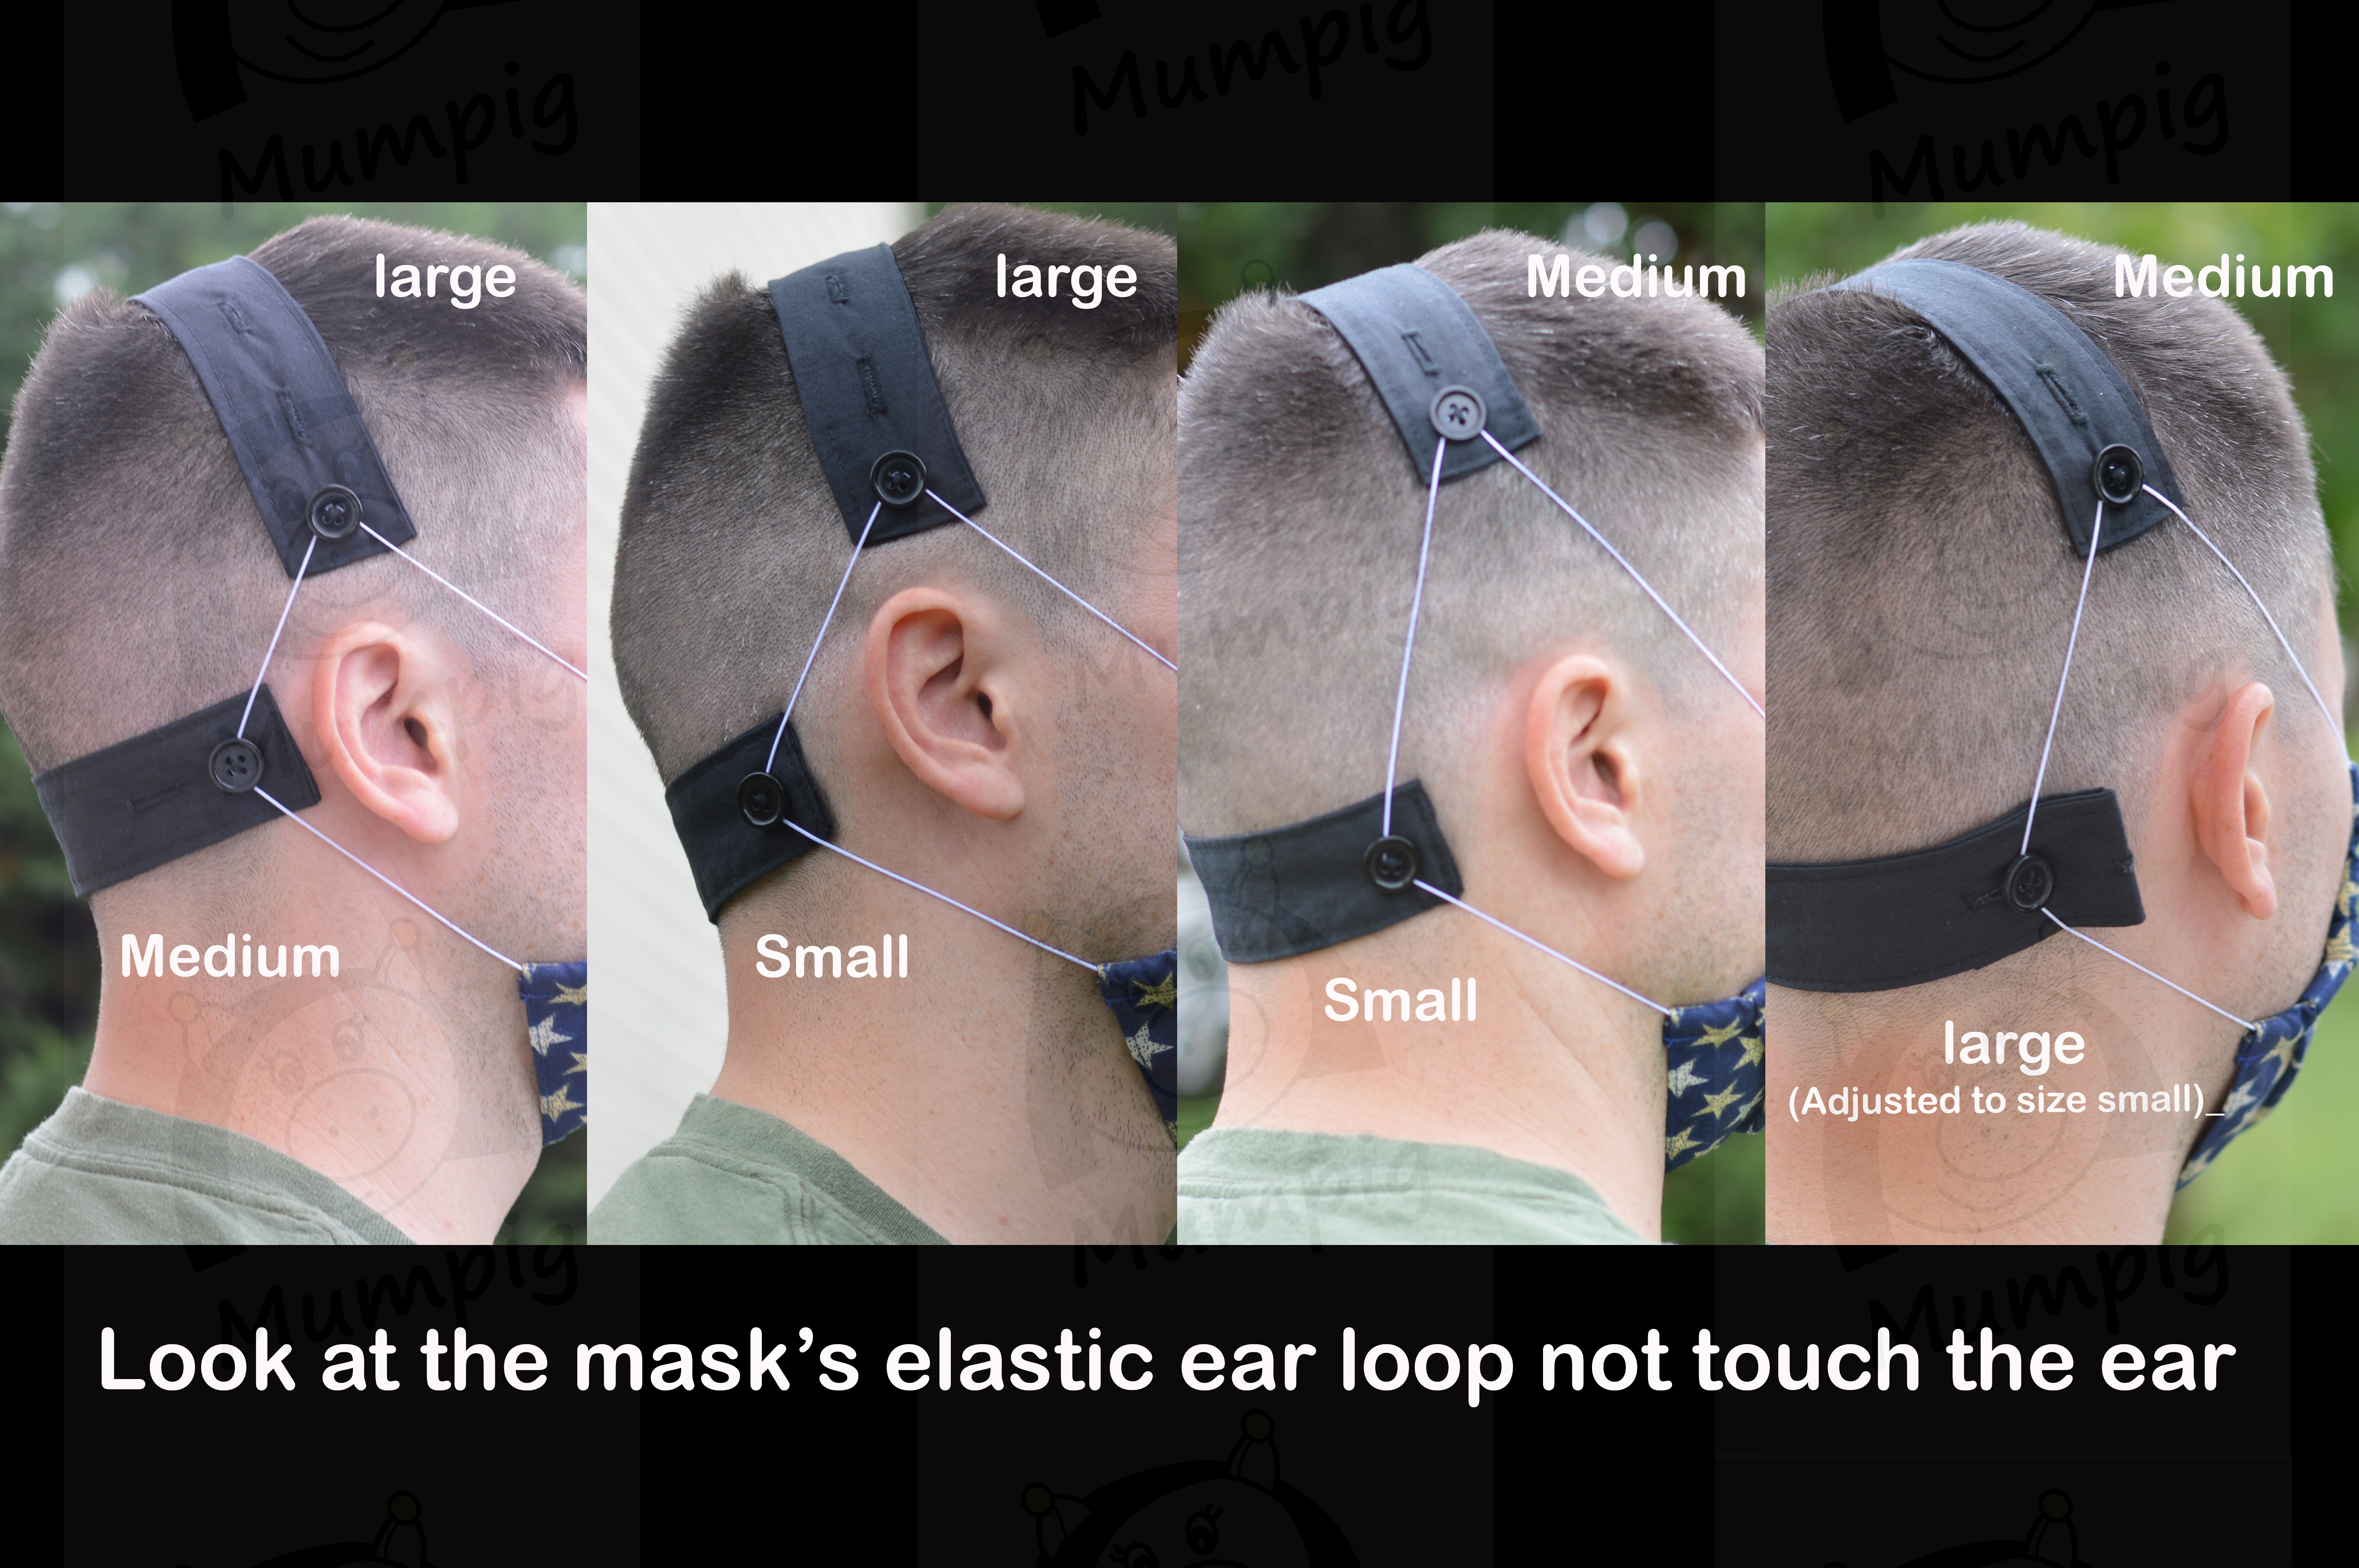 Multiple images side by side of a male modeling varius size ear savers on his head to display how much the mask strap gets pulled